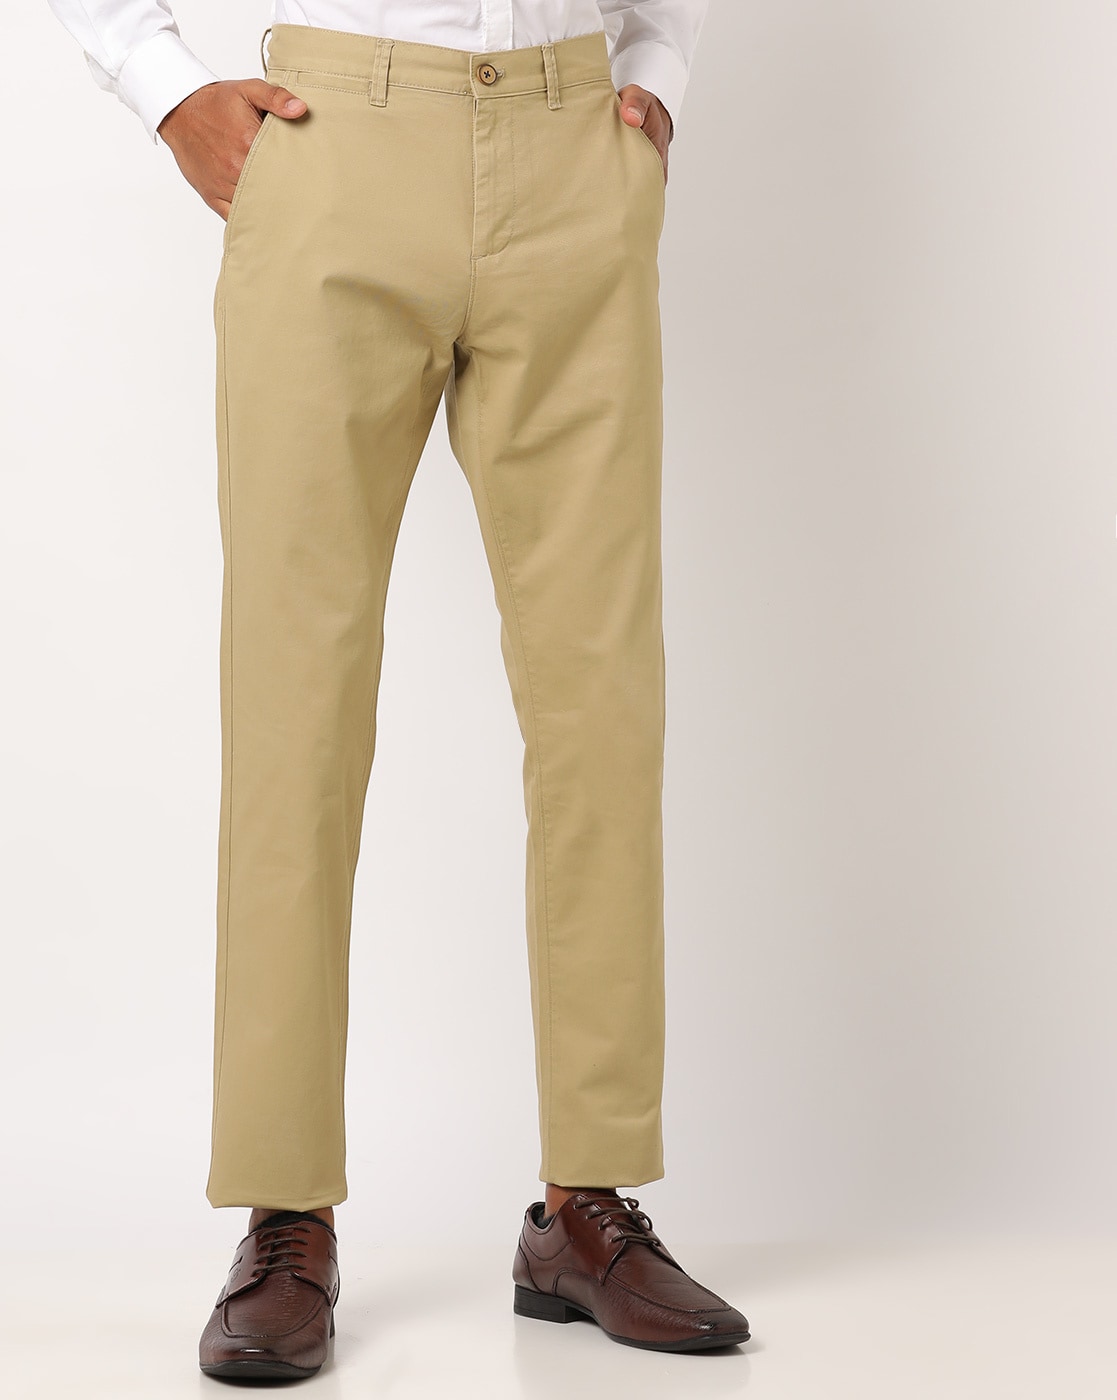 Milwaukee Men's 30 in. x 32 in. Khaki Cotton/Polyester/Spandex Flex Work  Pants with 6 Pockets 701K-3032 - The Home Depot